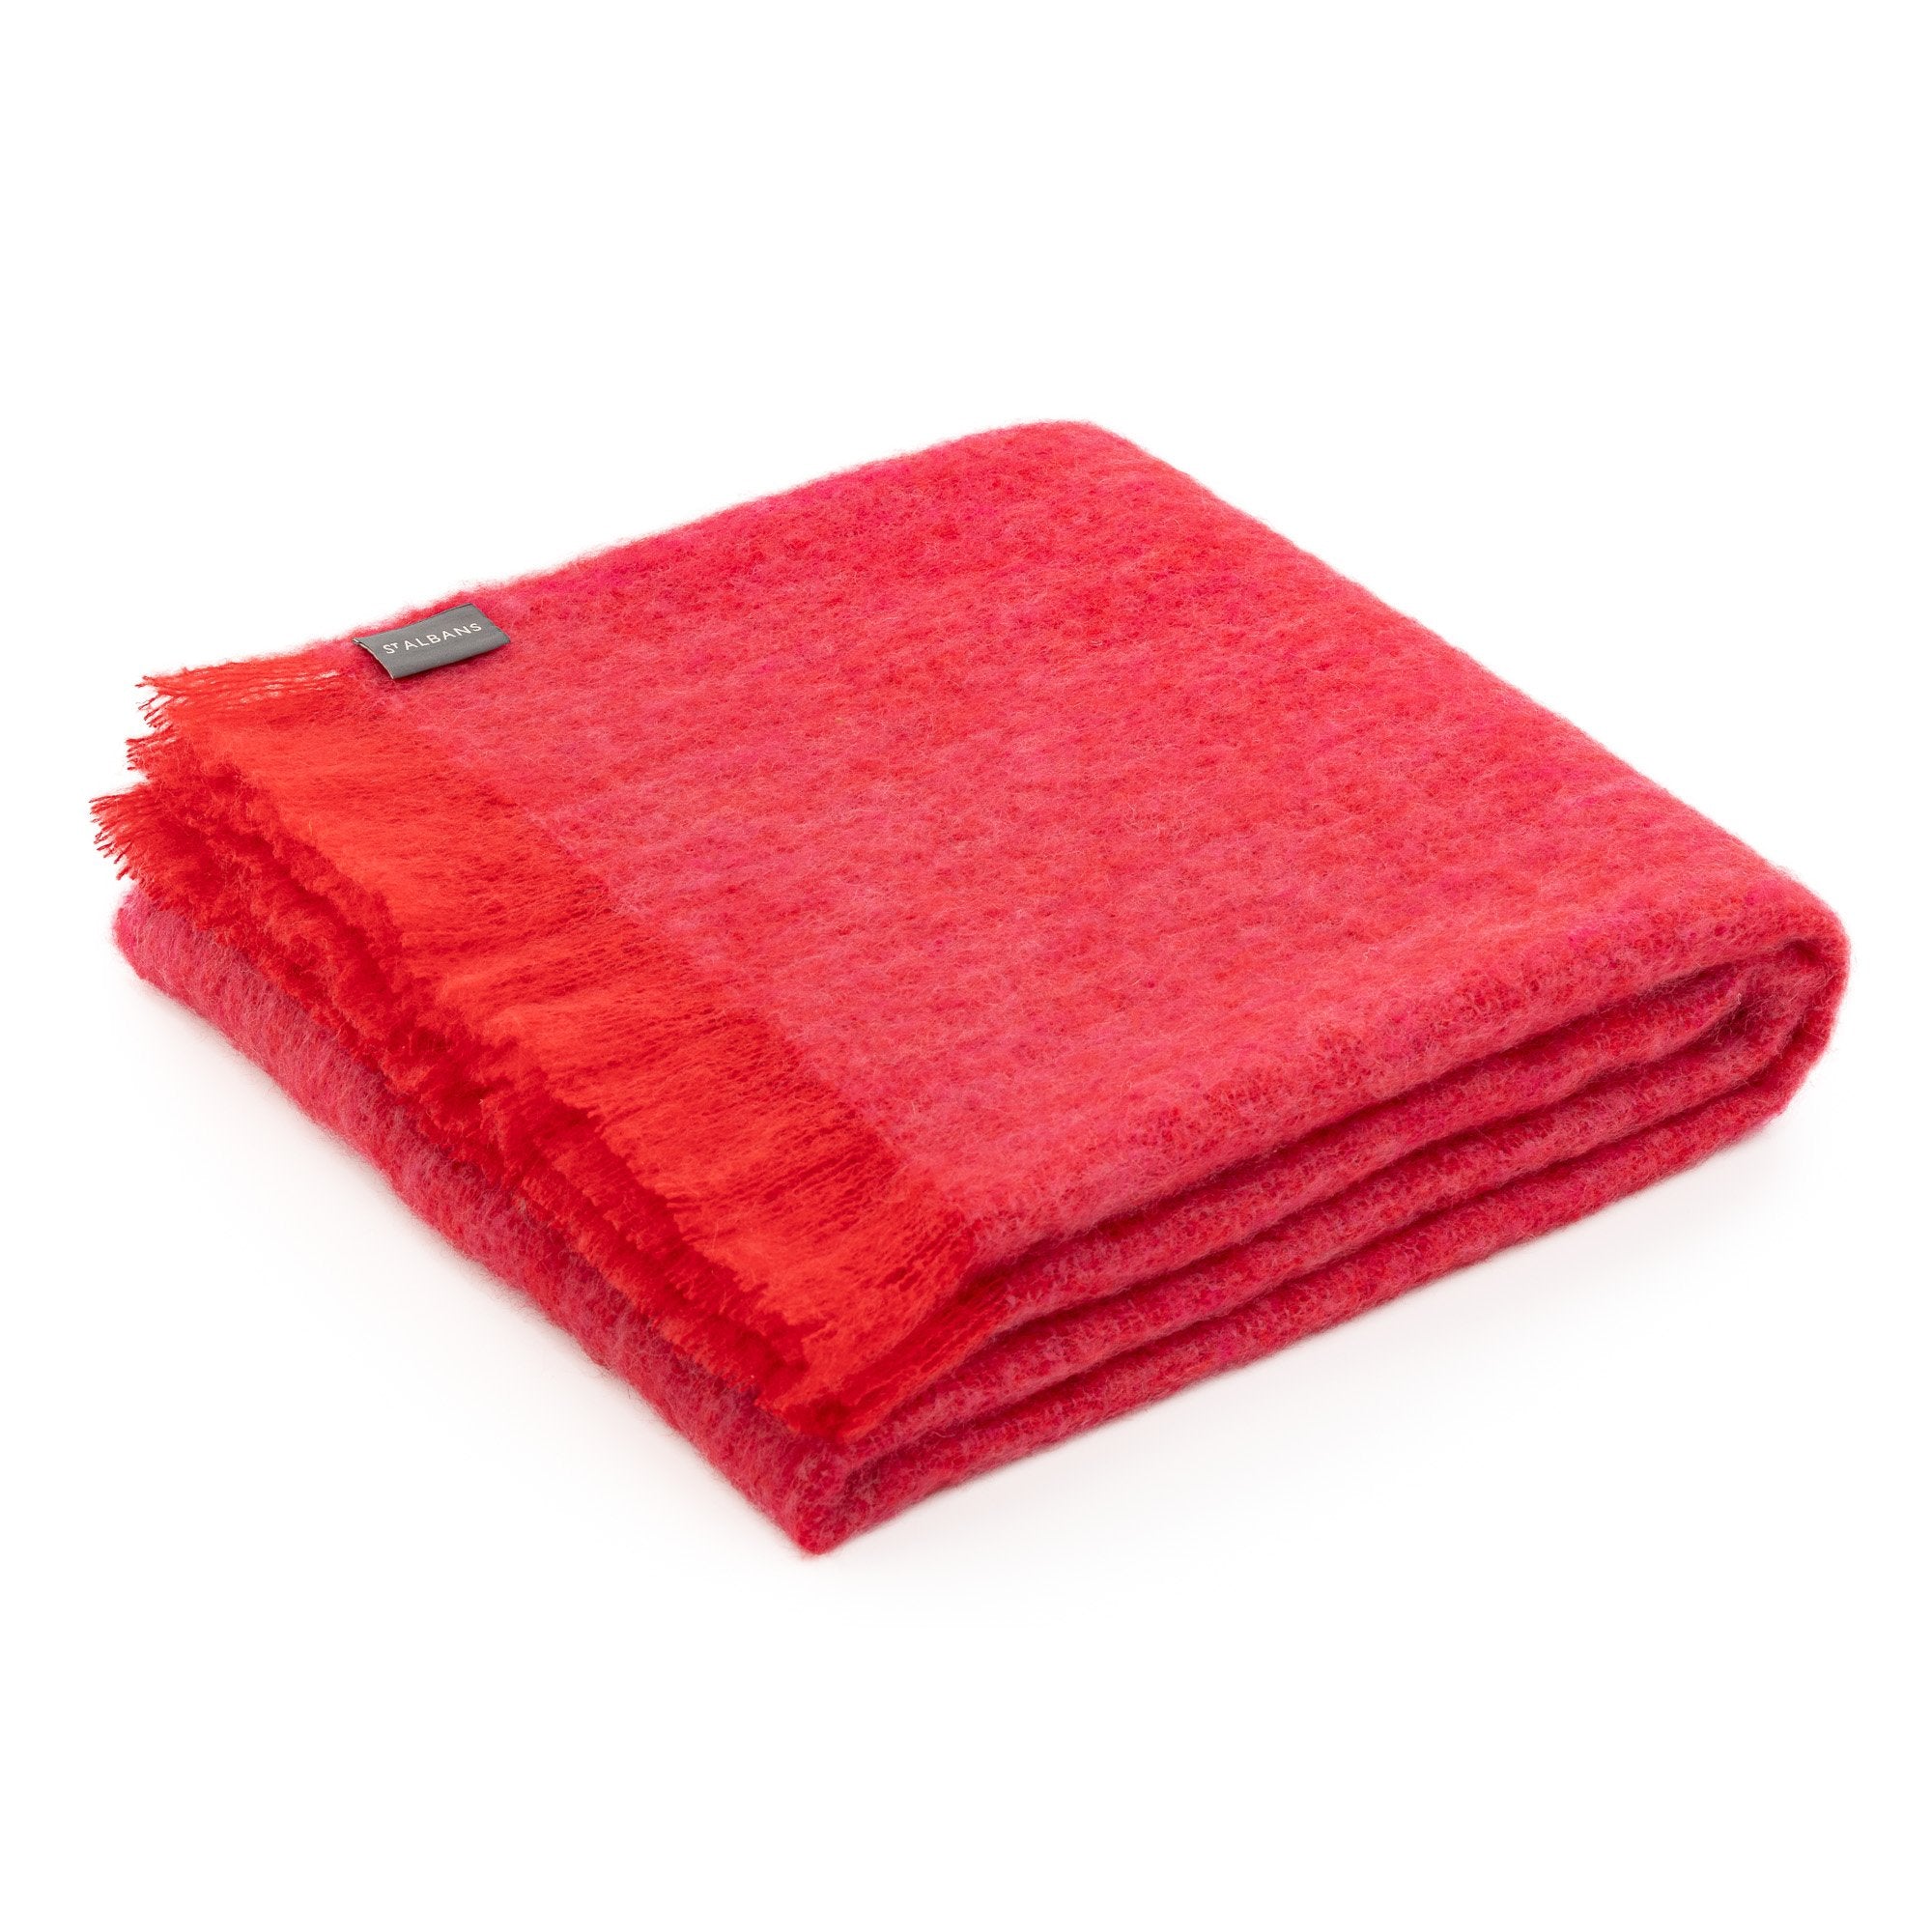 Mill & Hide - St Albans - Mohair Pomegranate Throw